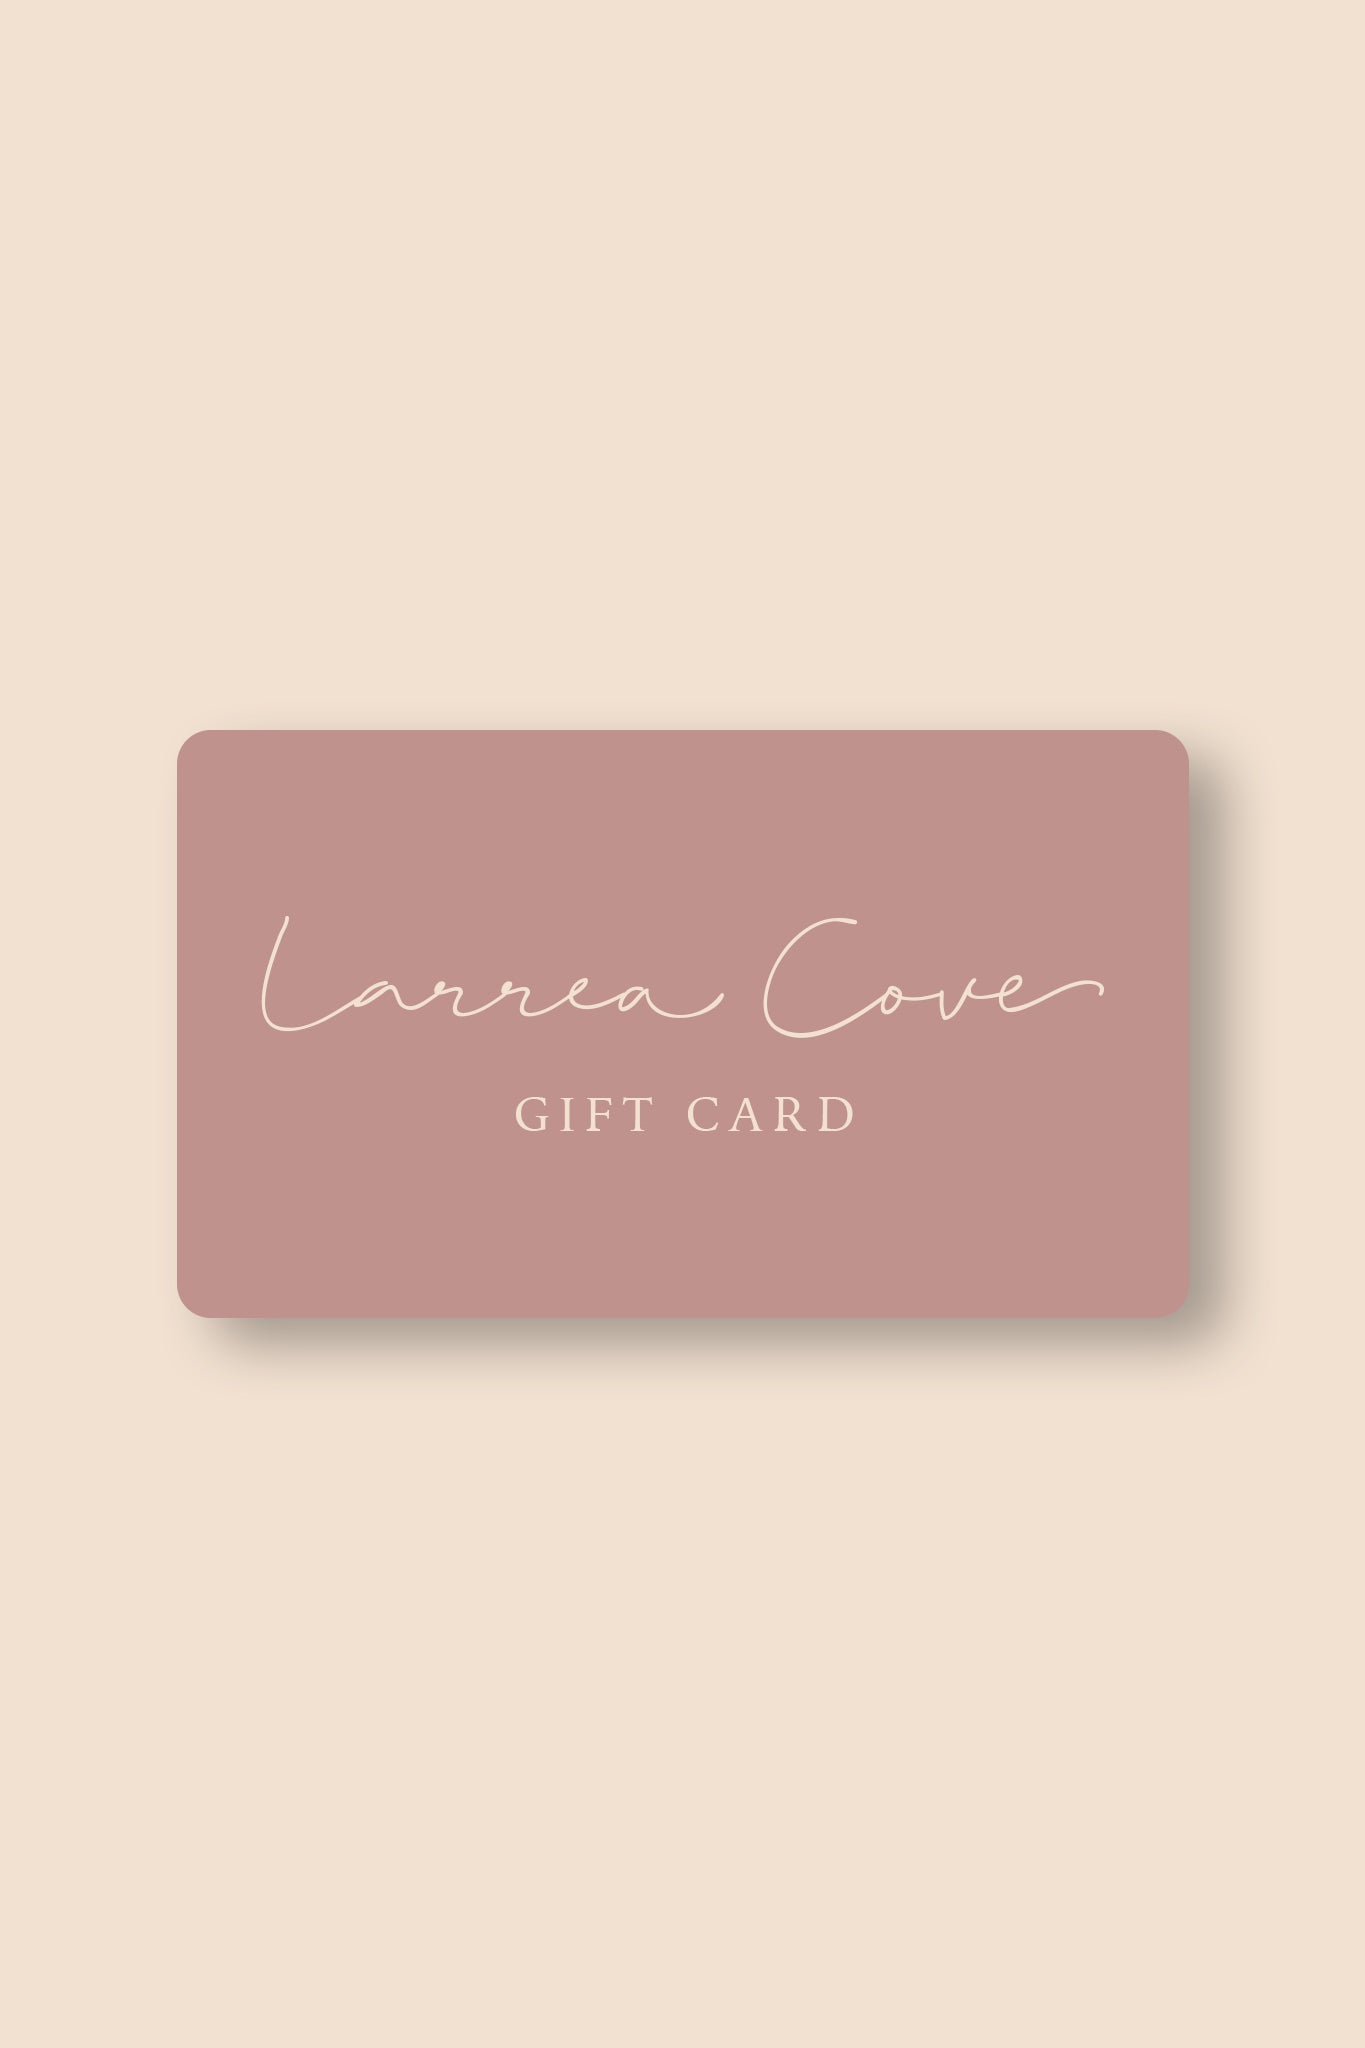 View 1 of Larrea Cove E-Gift Card, a Gift Card from Larrea Cove. Detail: Gift Cards can be use...